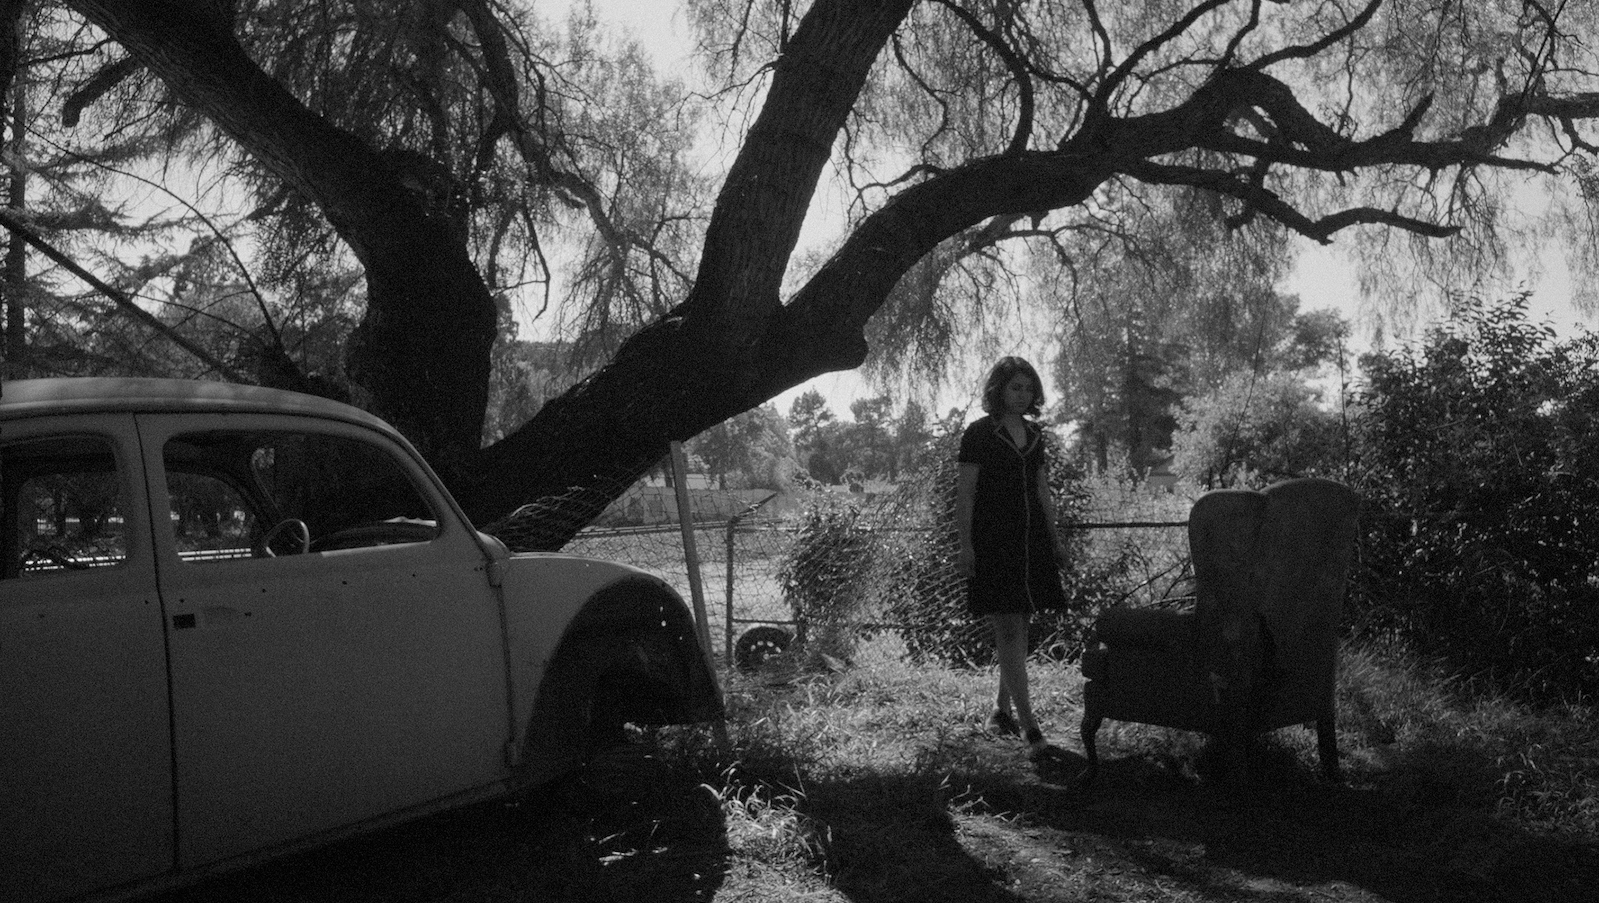 A black and white shot of a woman standing under a tree outdoors and facing a chair